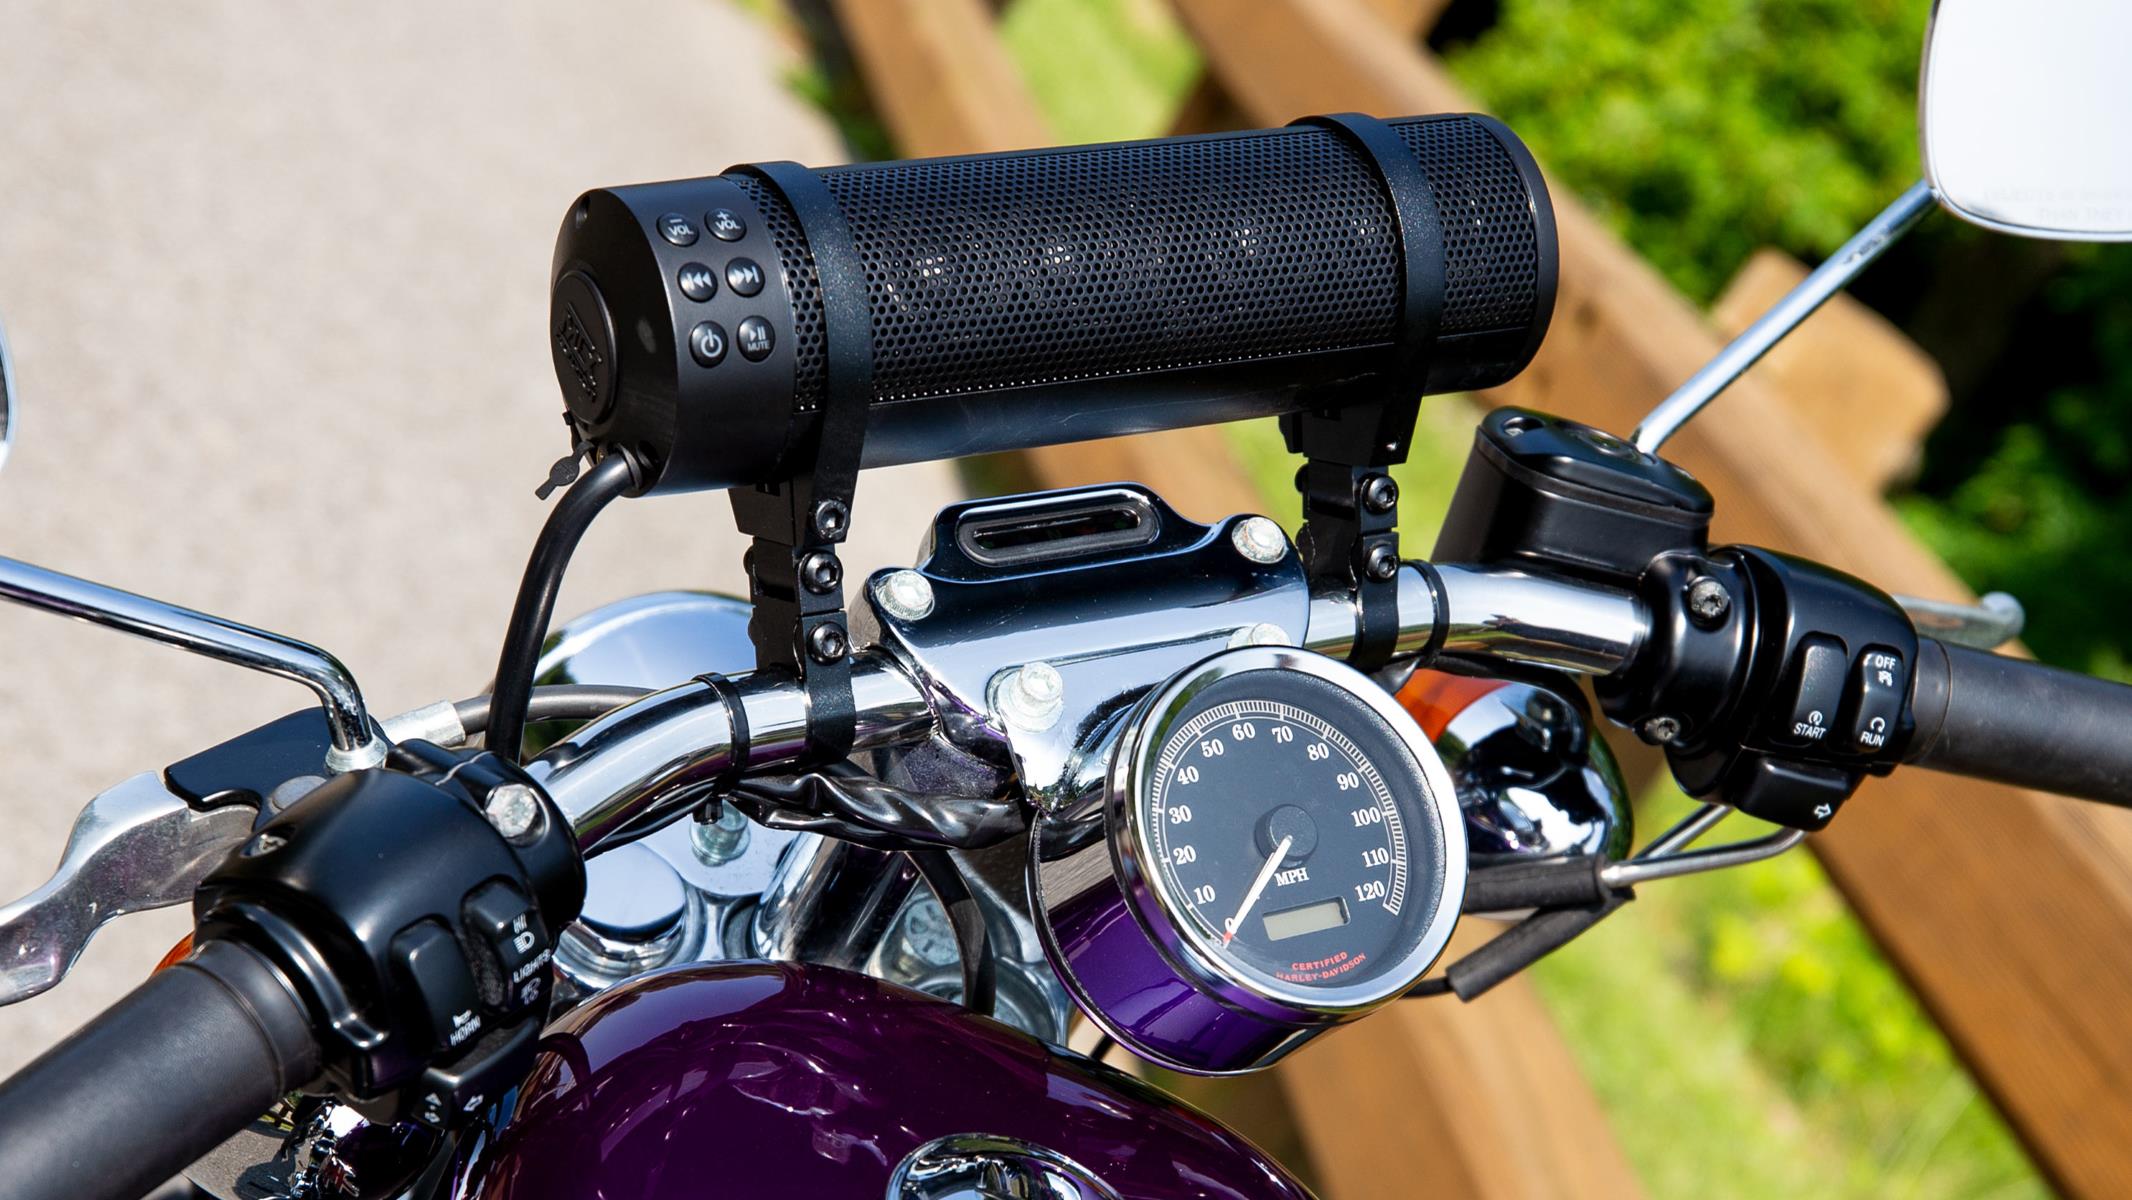 upgrade-your-ride-install-bluetooth-speakers-on-your-motorcycle